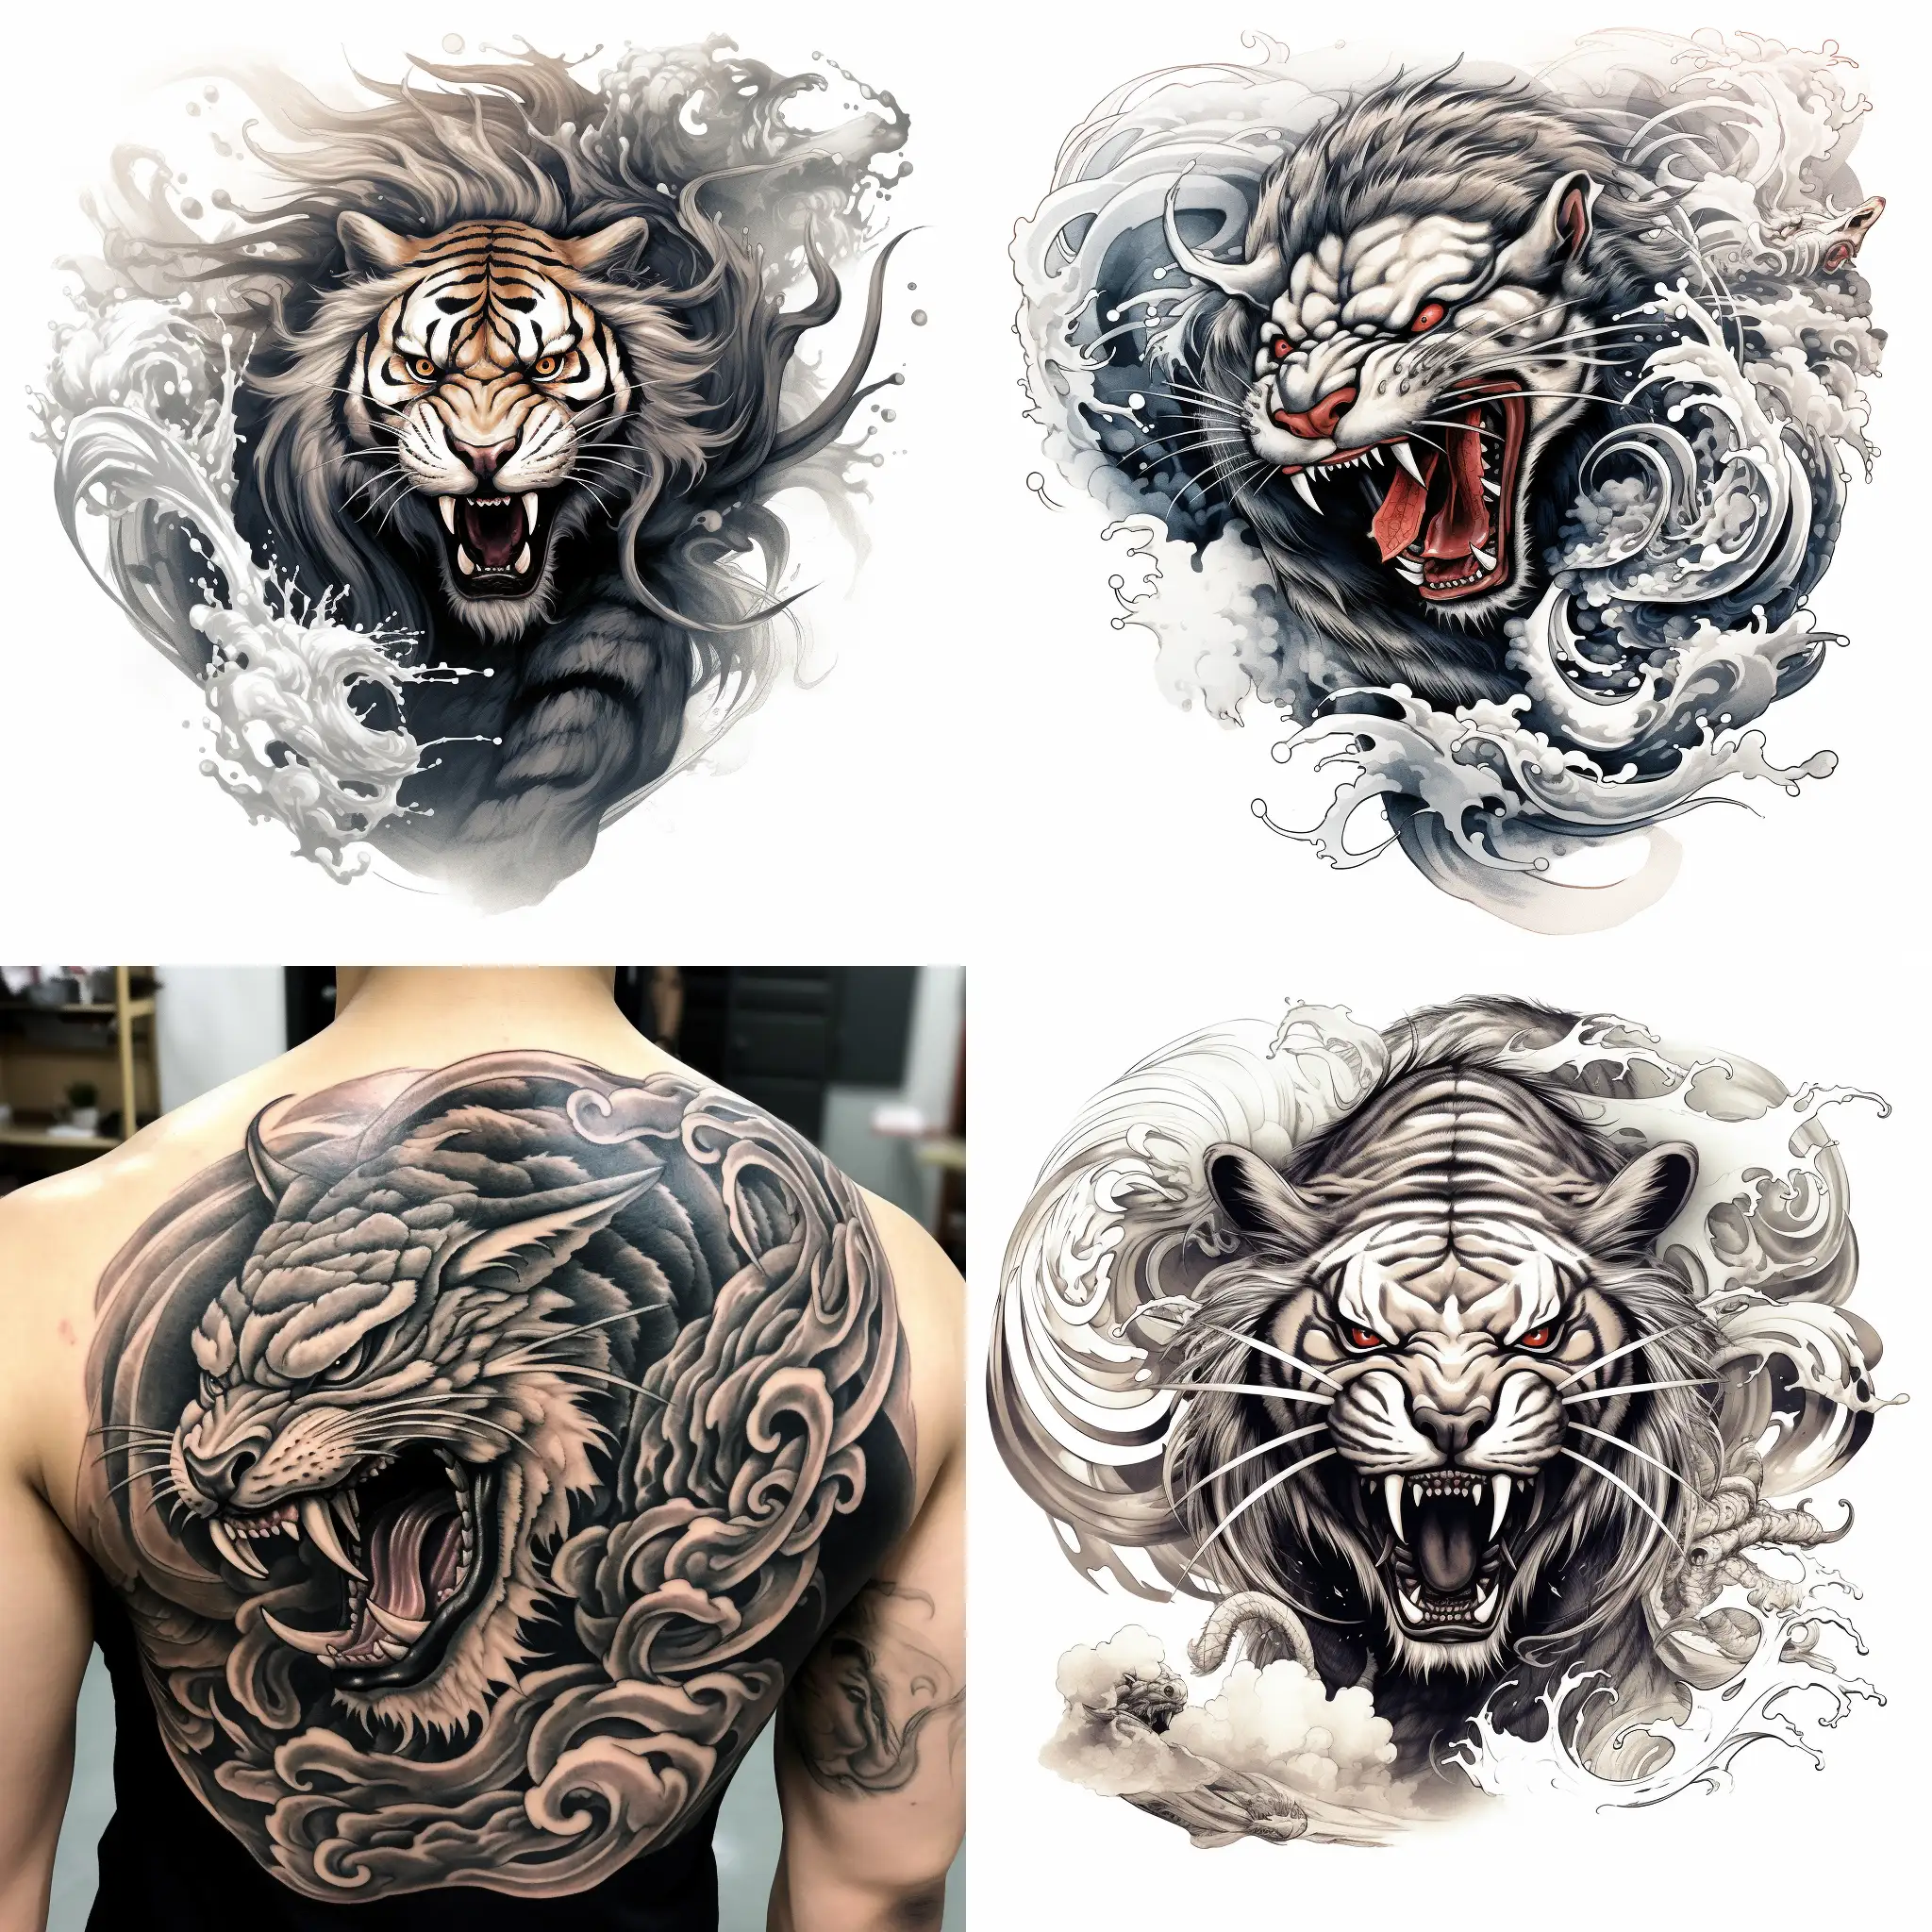 A black and white tattoo of a roaring tiger facing front, with its head on the shoulder and its body extending to the elbow. The tiger is wrapped by a scary Chinese dragon that coils around its neck and legs. The dragon has scales, horns, whiskers, and a long tail. The tattoo is in a Japanese fantasy style, with sharp lines and contrast.